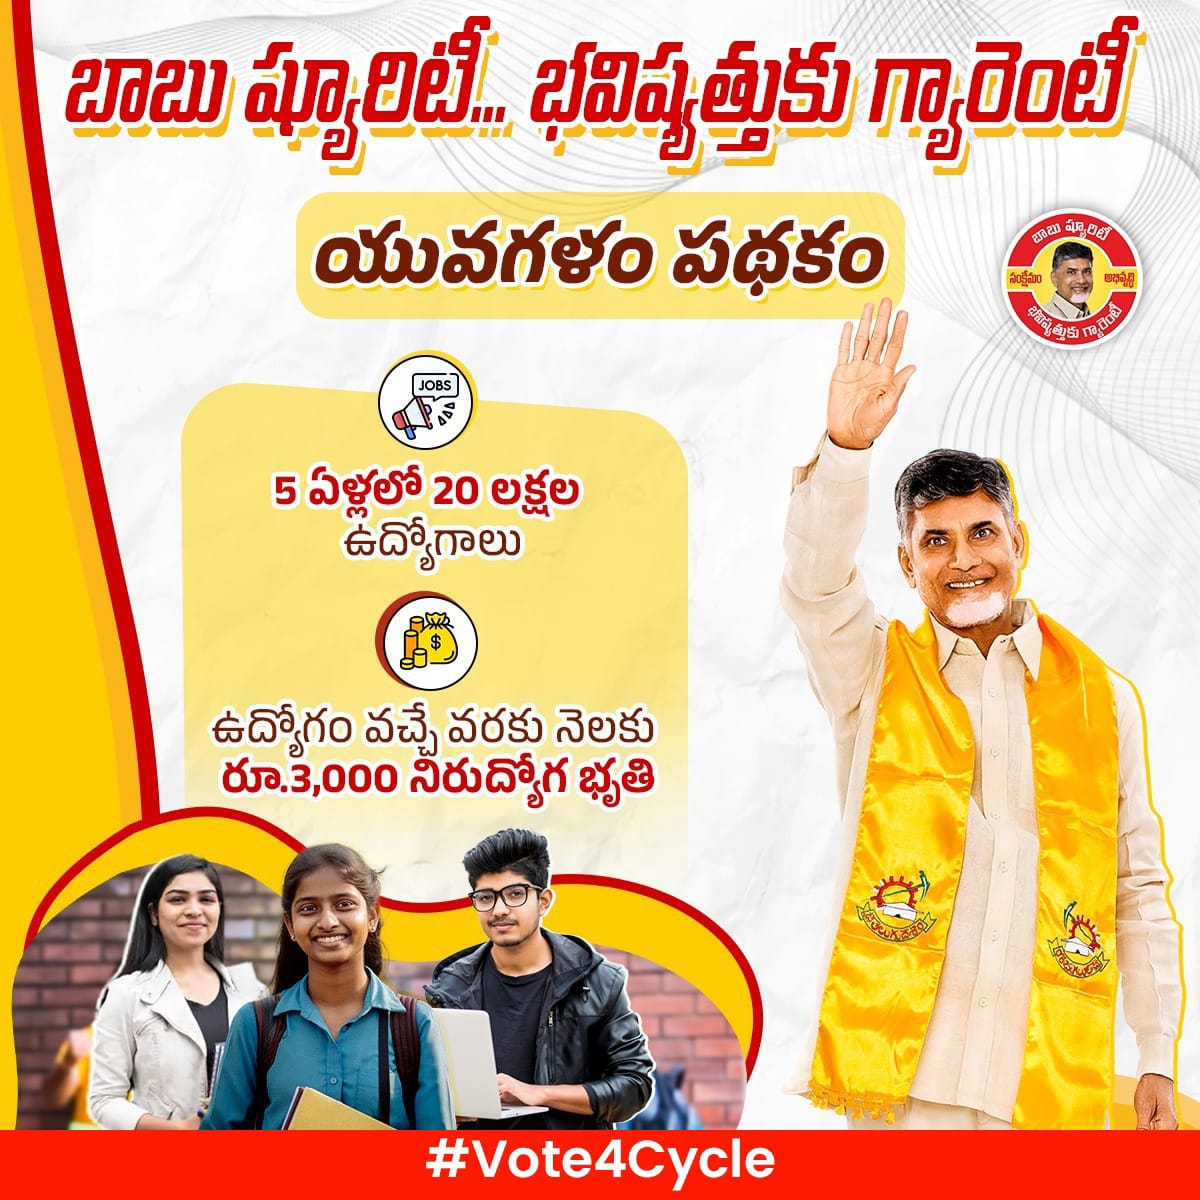 Rural development initiatives have thrived under Chandrababu Naidu's leadership. Let's continue the cycle of progress! #CycleisComing